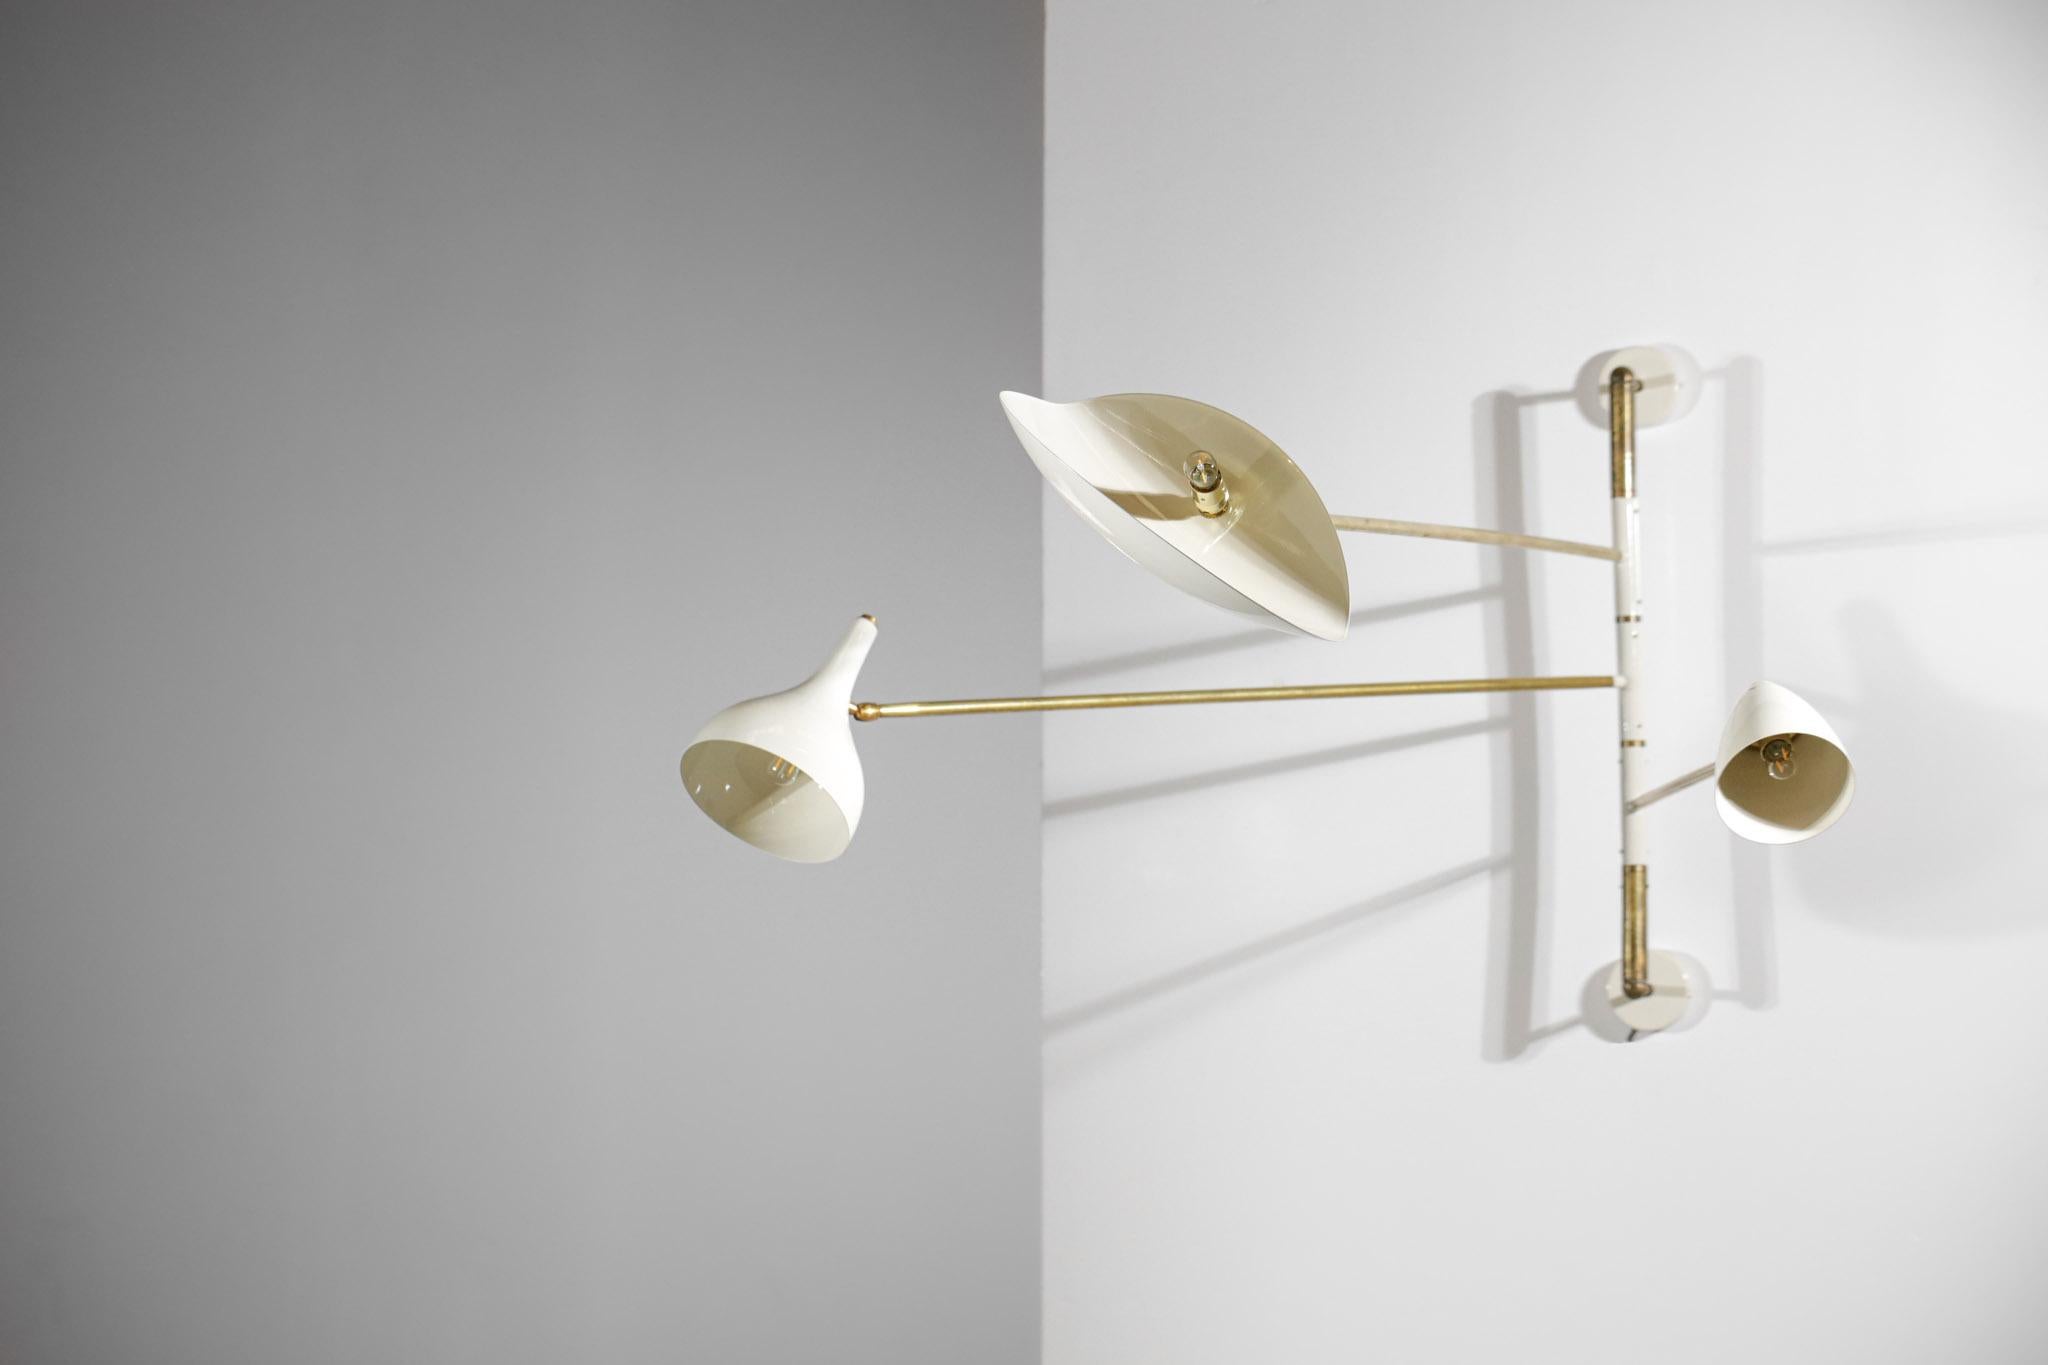 Very original modern wall lamp with three arms. Handcrafted in Italy.  Structure and arms in solid brass, lampshade and wall cups in white lacquered metal. Possibility to orientate the three arms and the lampshades in different positions. Excellent